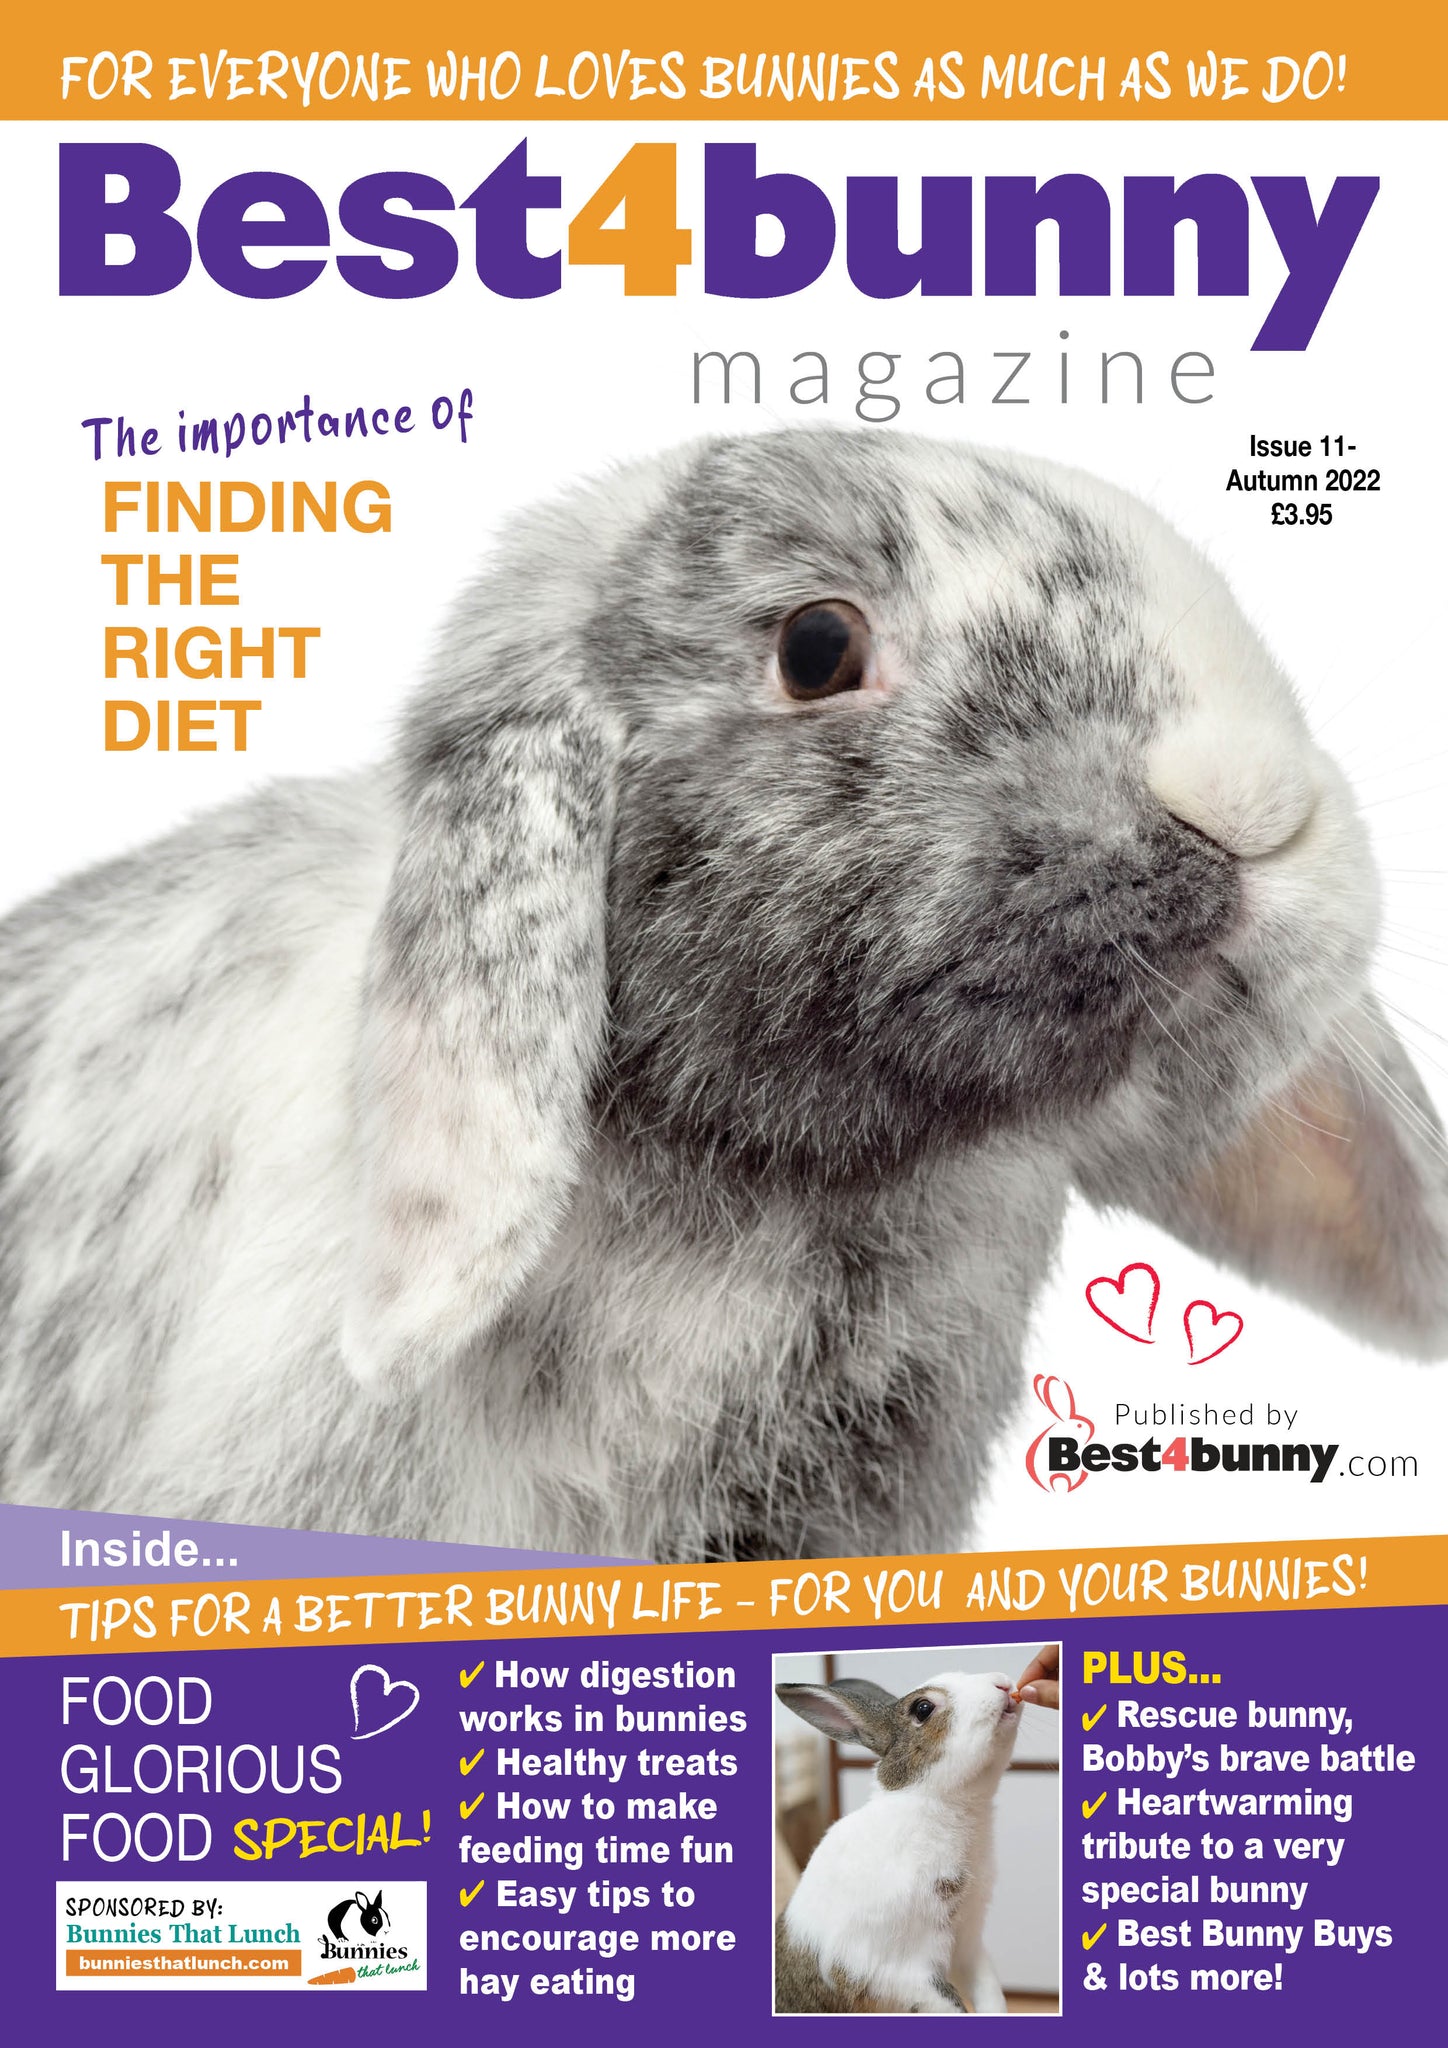 best 4 bunny magazine issue 11 autumn 2022. The cover shows a grey and white lop eared rabbit and a top article titles 'the importance of finding the right diet'. Inside includes tips for a better bunny life for you and your bunnies. 